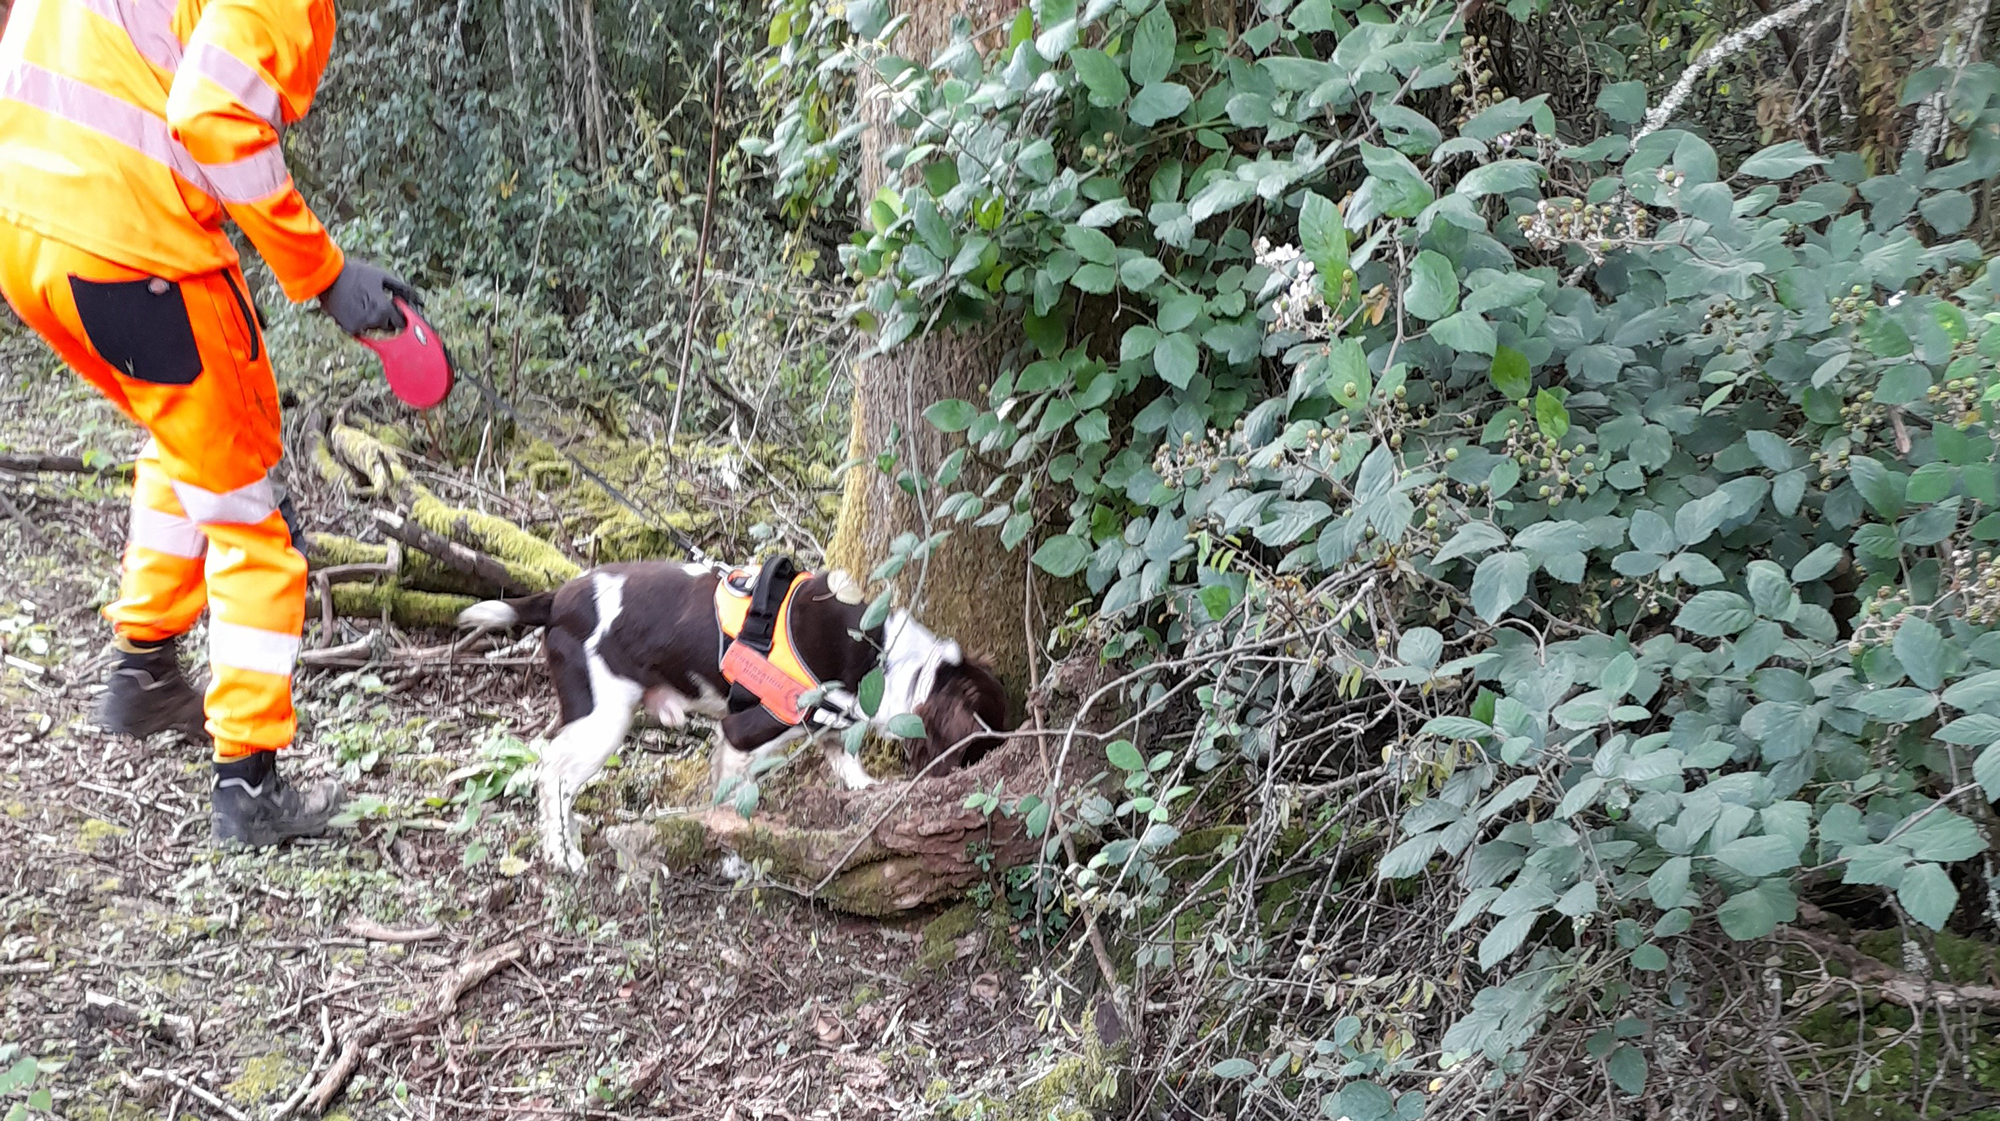 Specialist sniffer dogs help with newt surveys